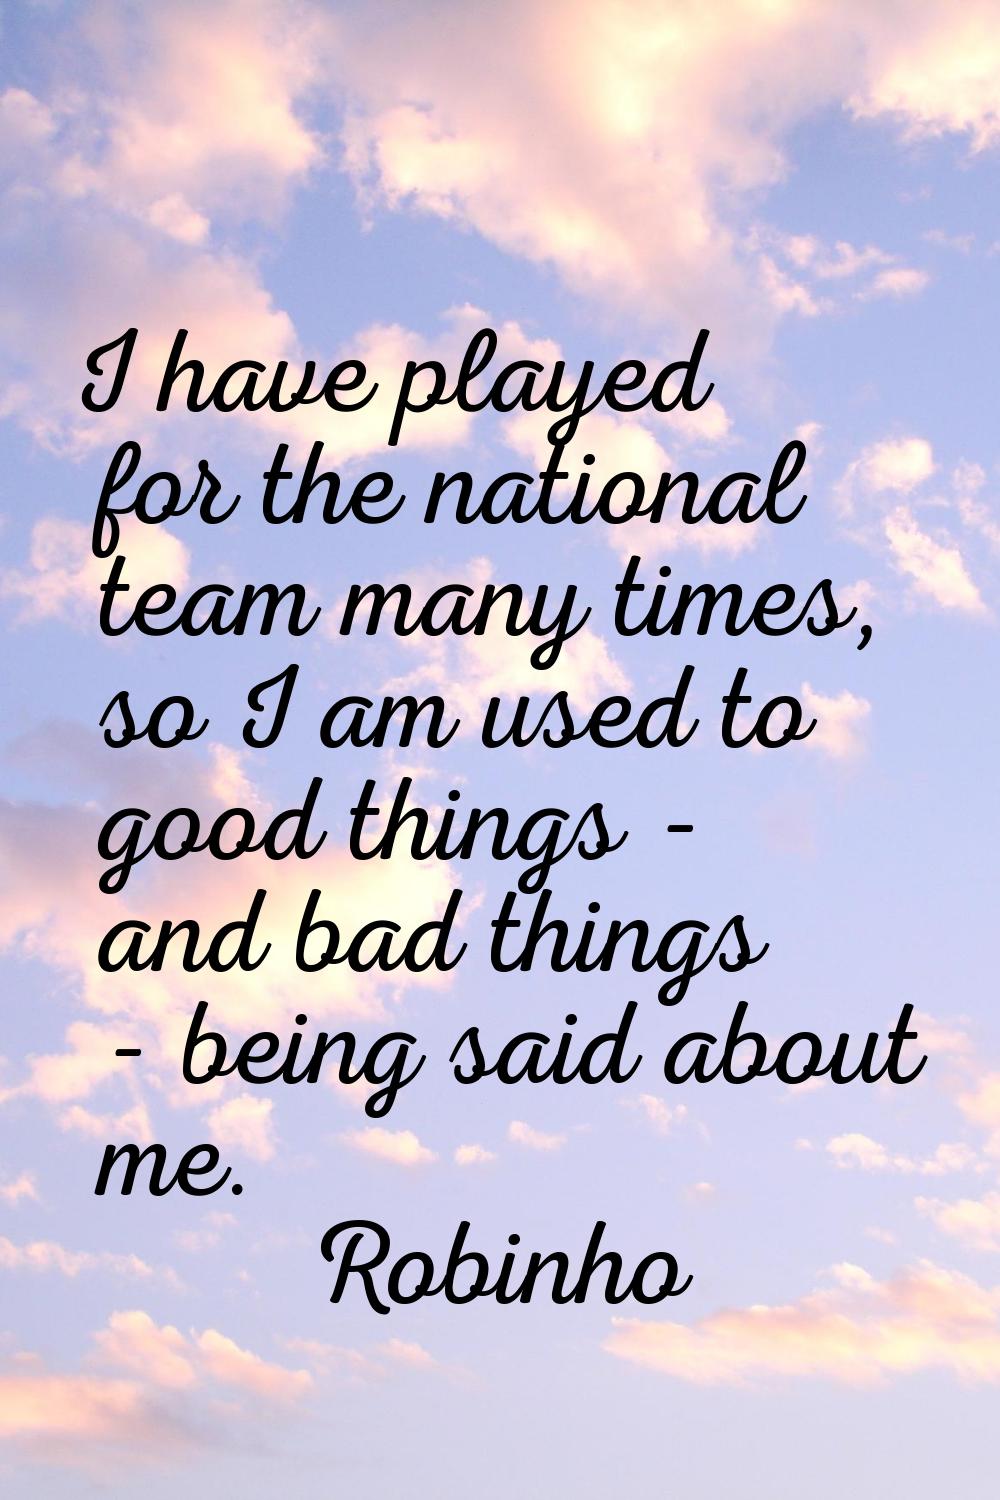 I have played for the national team many times, so I am used to good things - and bad things - bein